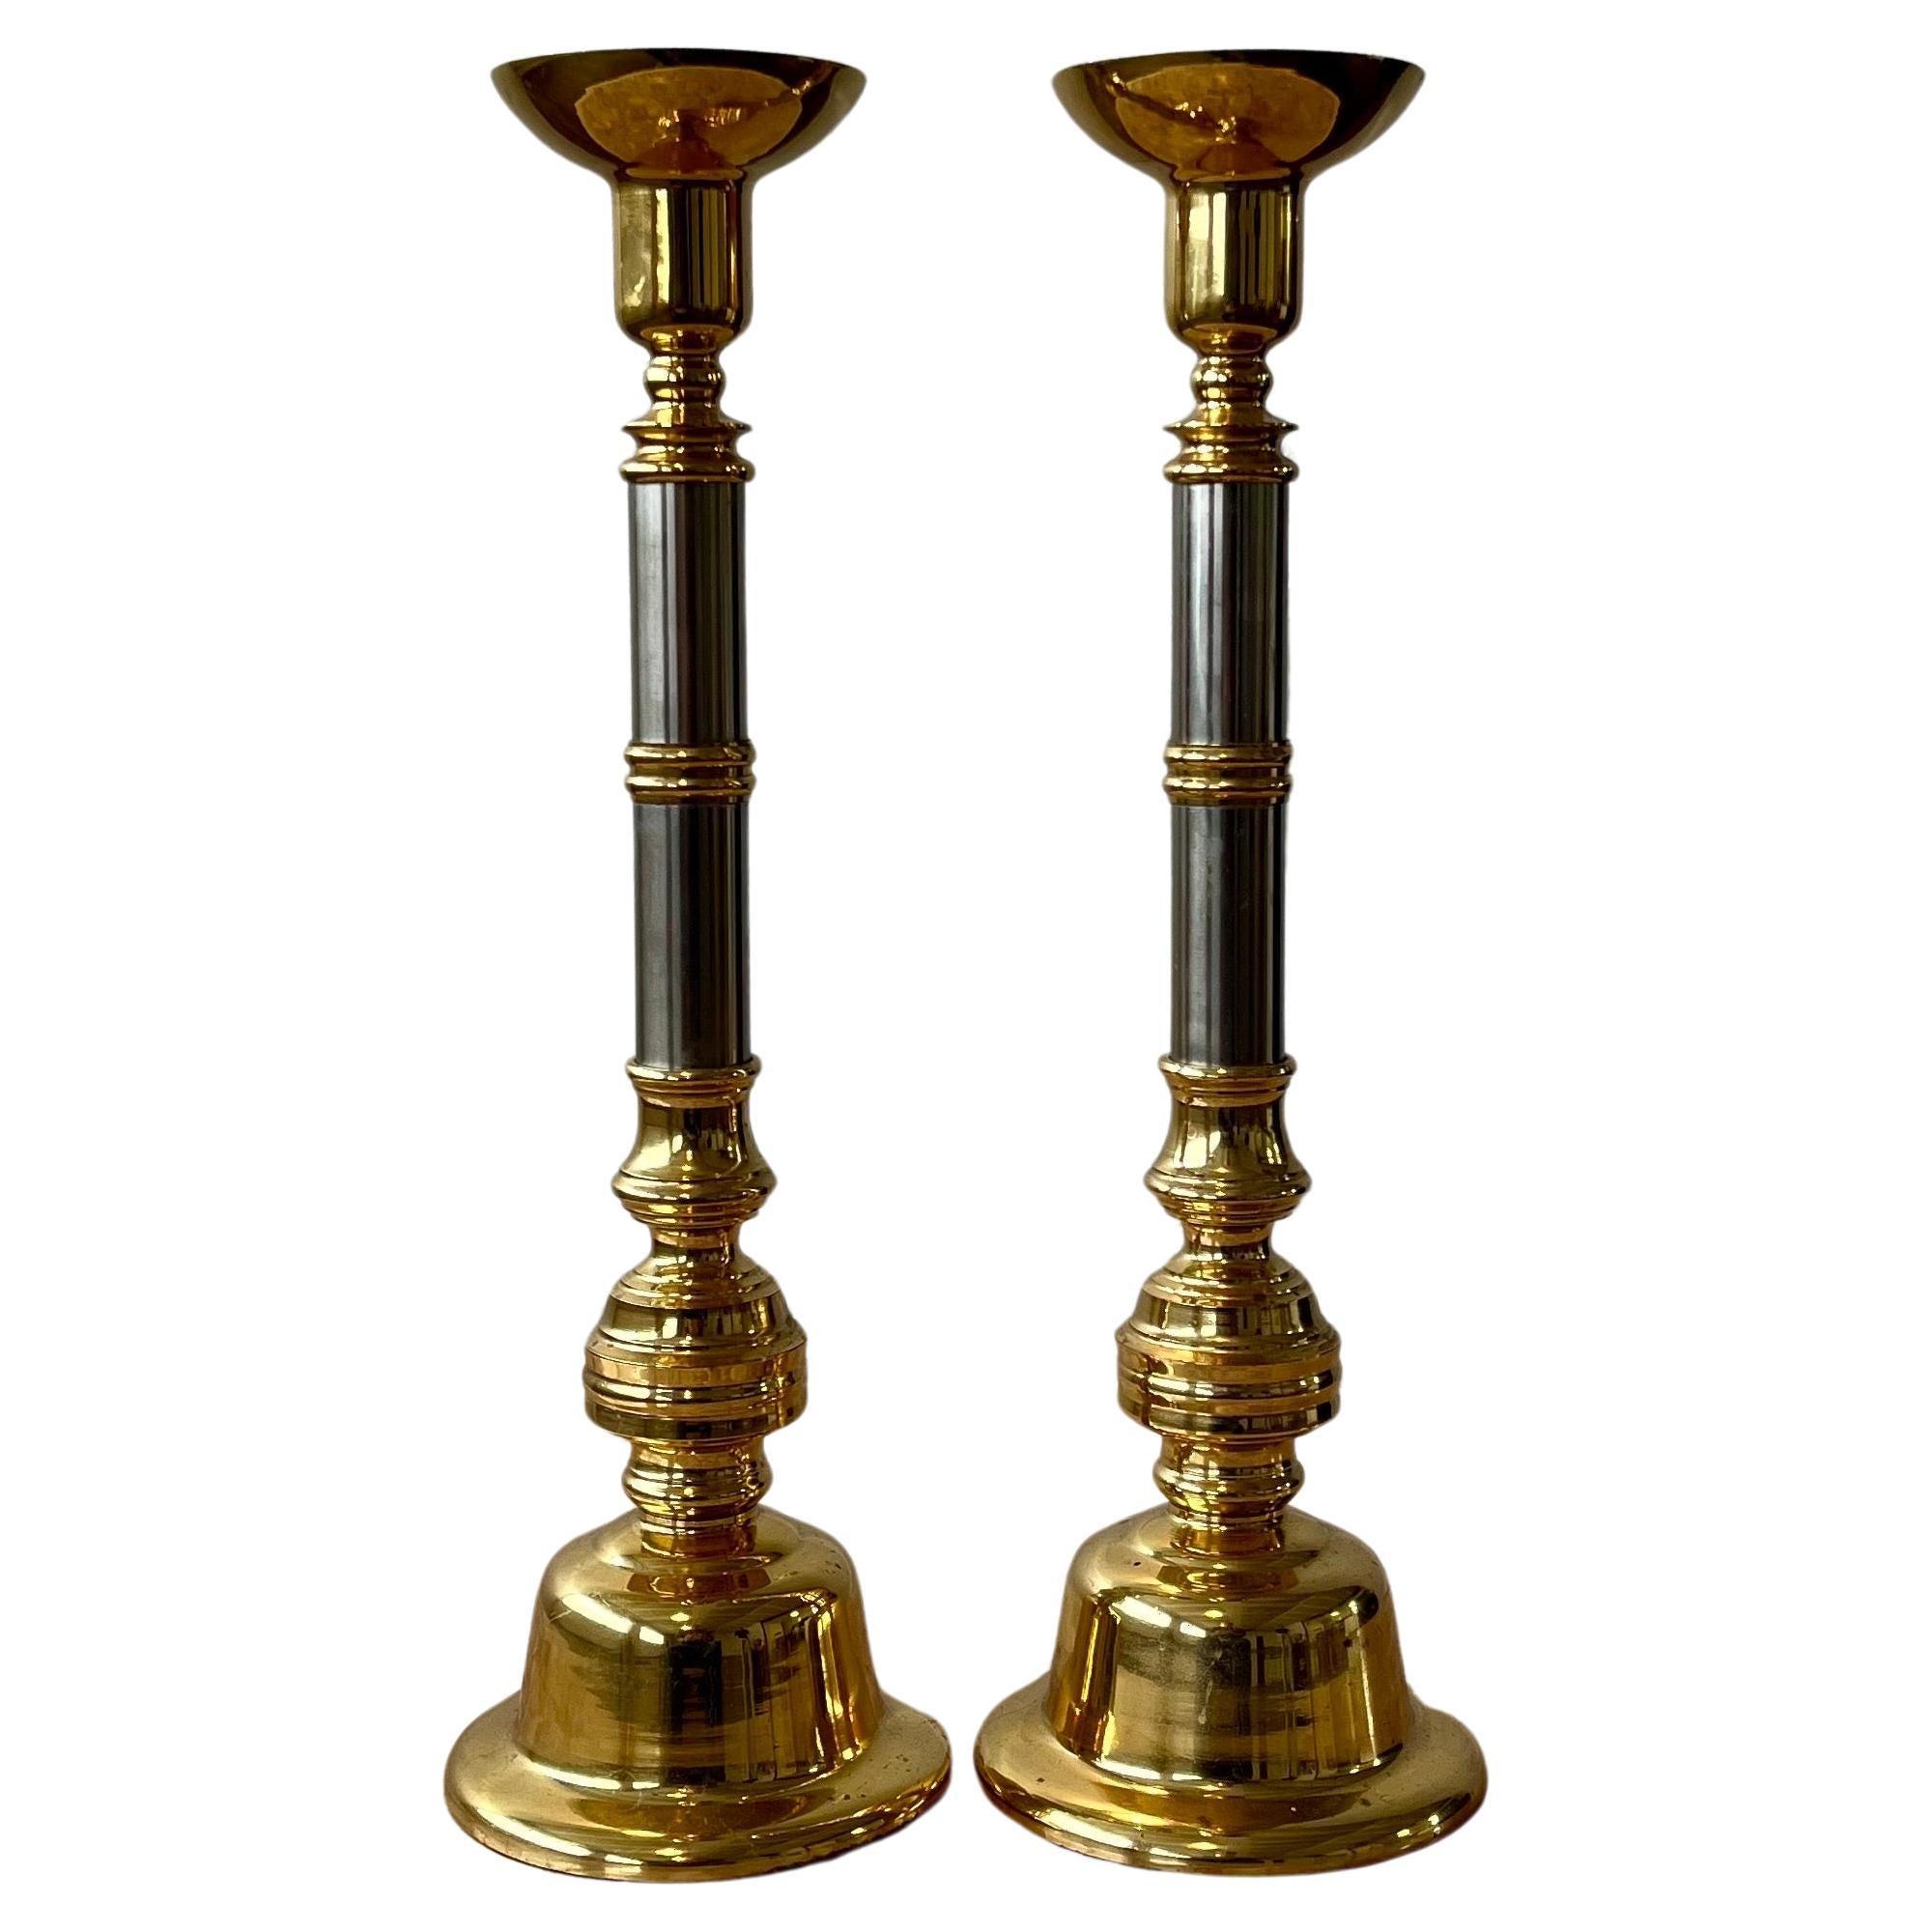 1970's Candle Holders Neoclassical Brass and Chrome Candle Sticks - a Pair For Sale